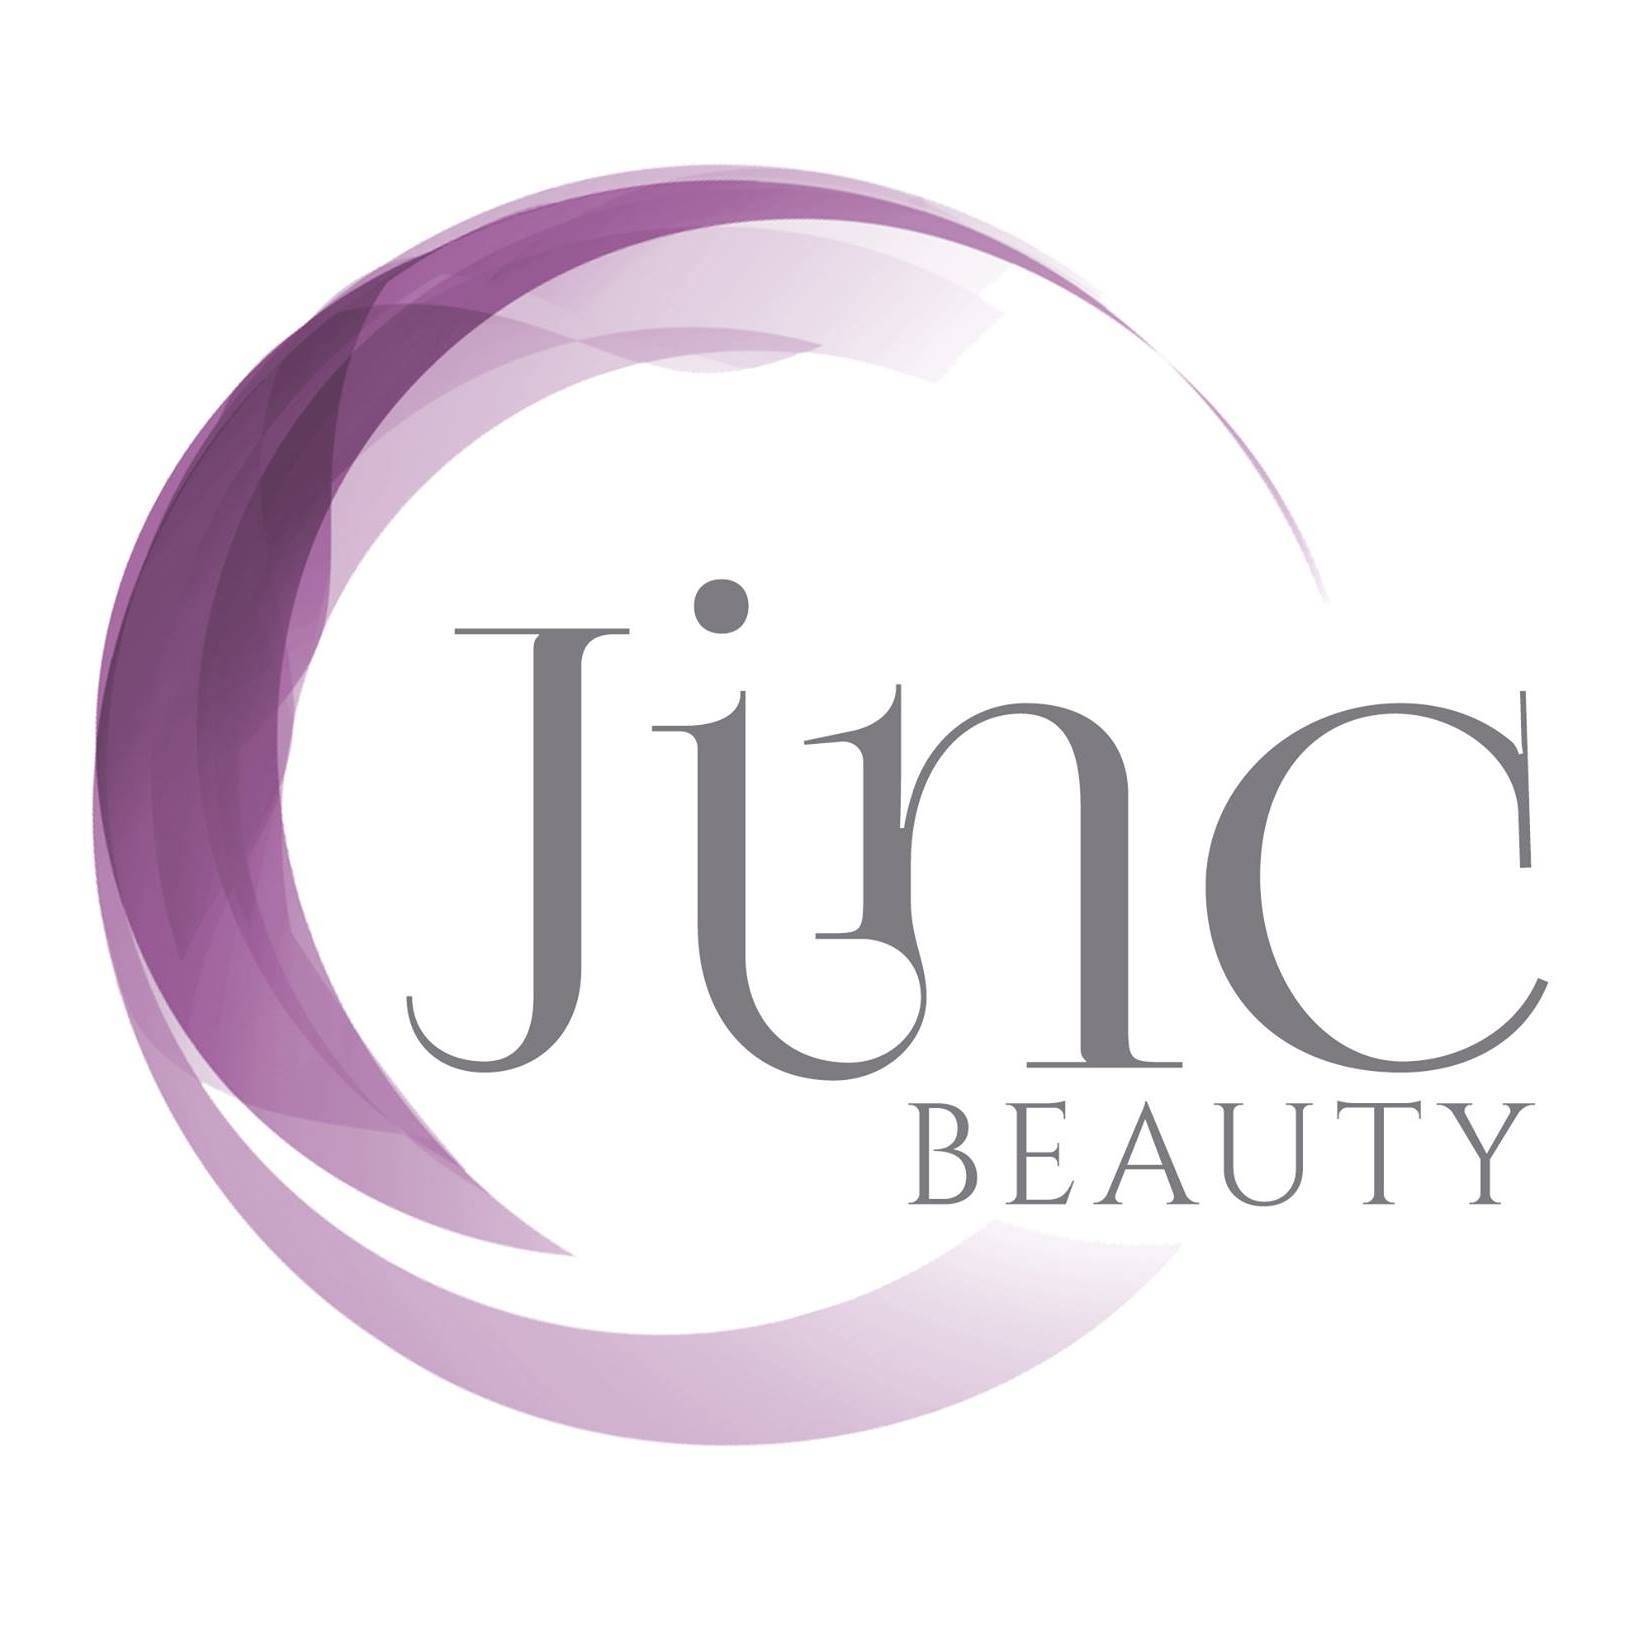 Jinc Beauty - Excellence in Beauty & Aesthetic Services